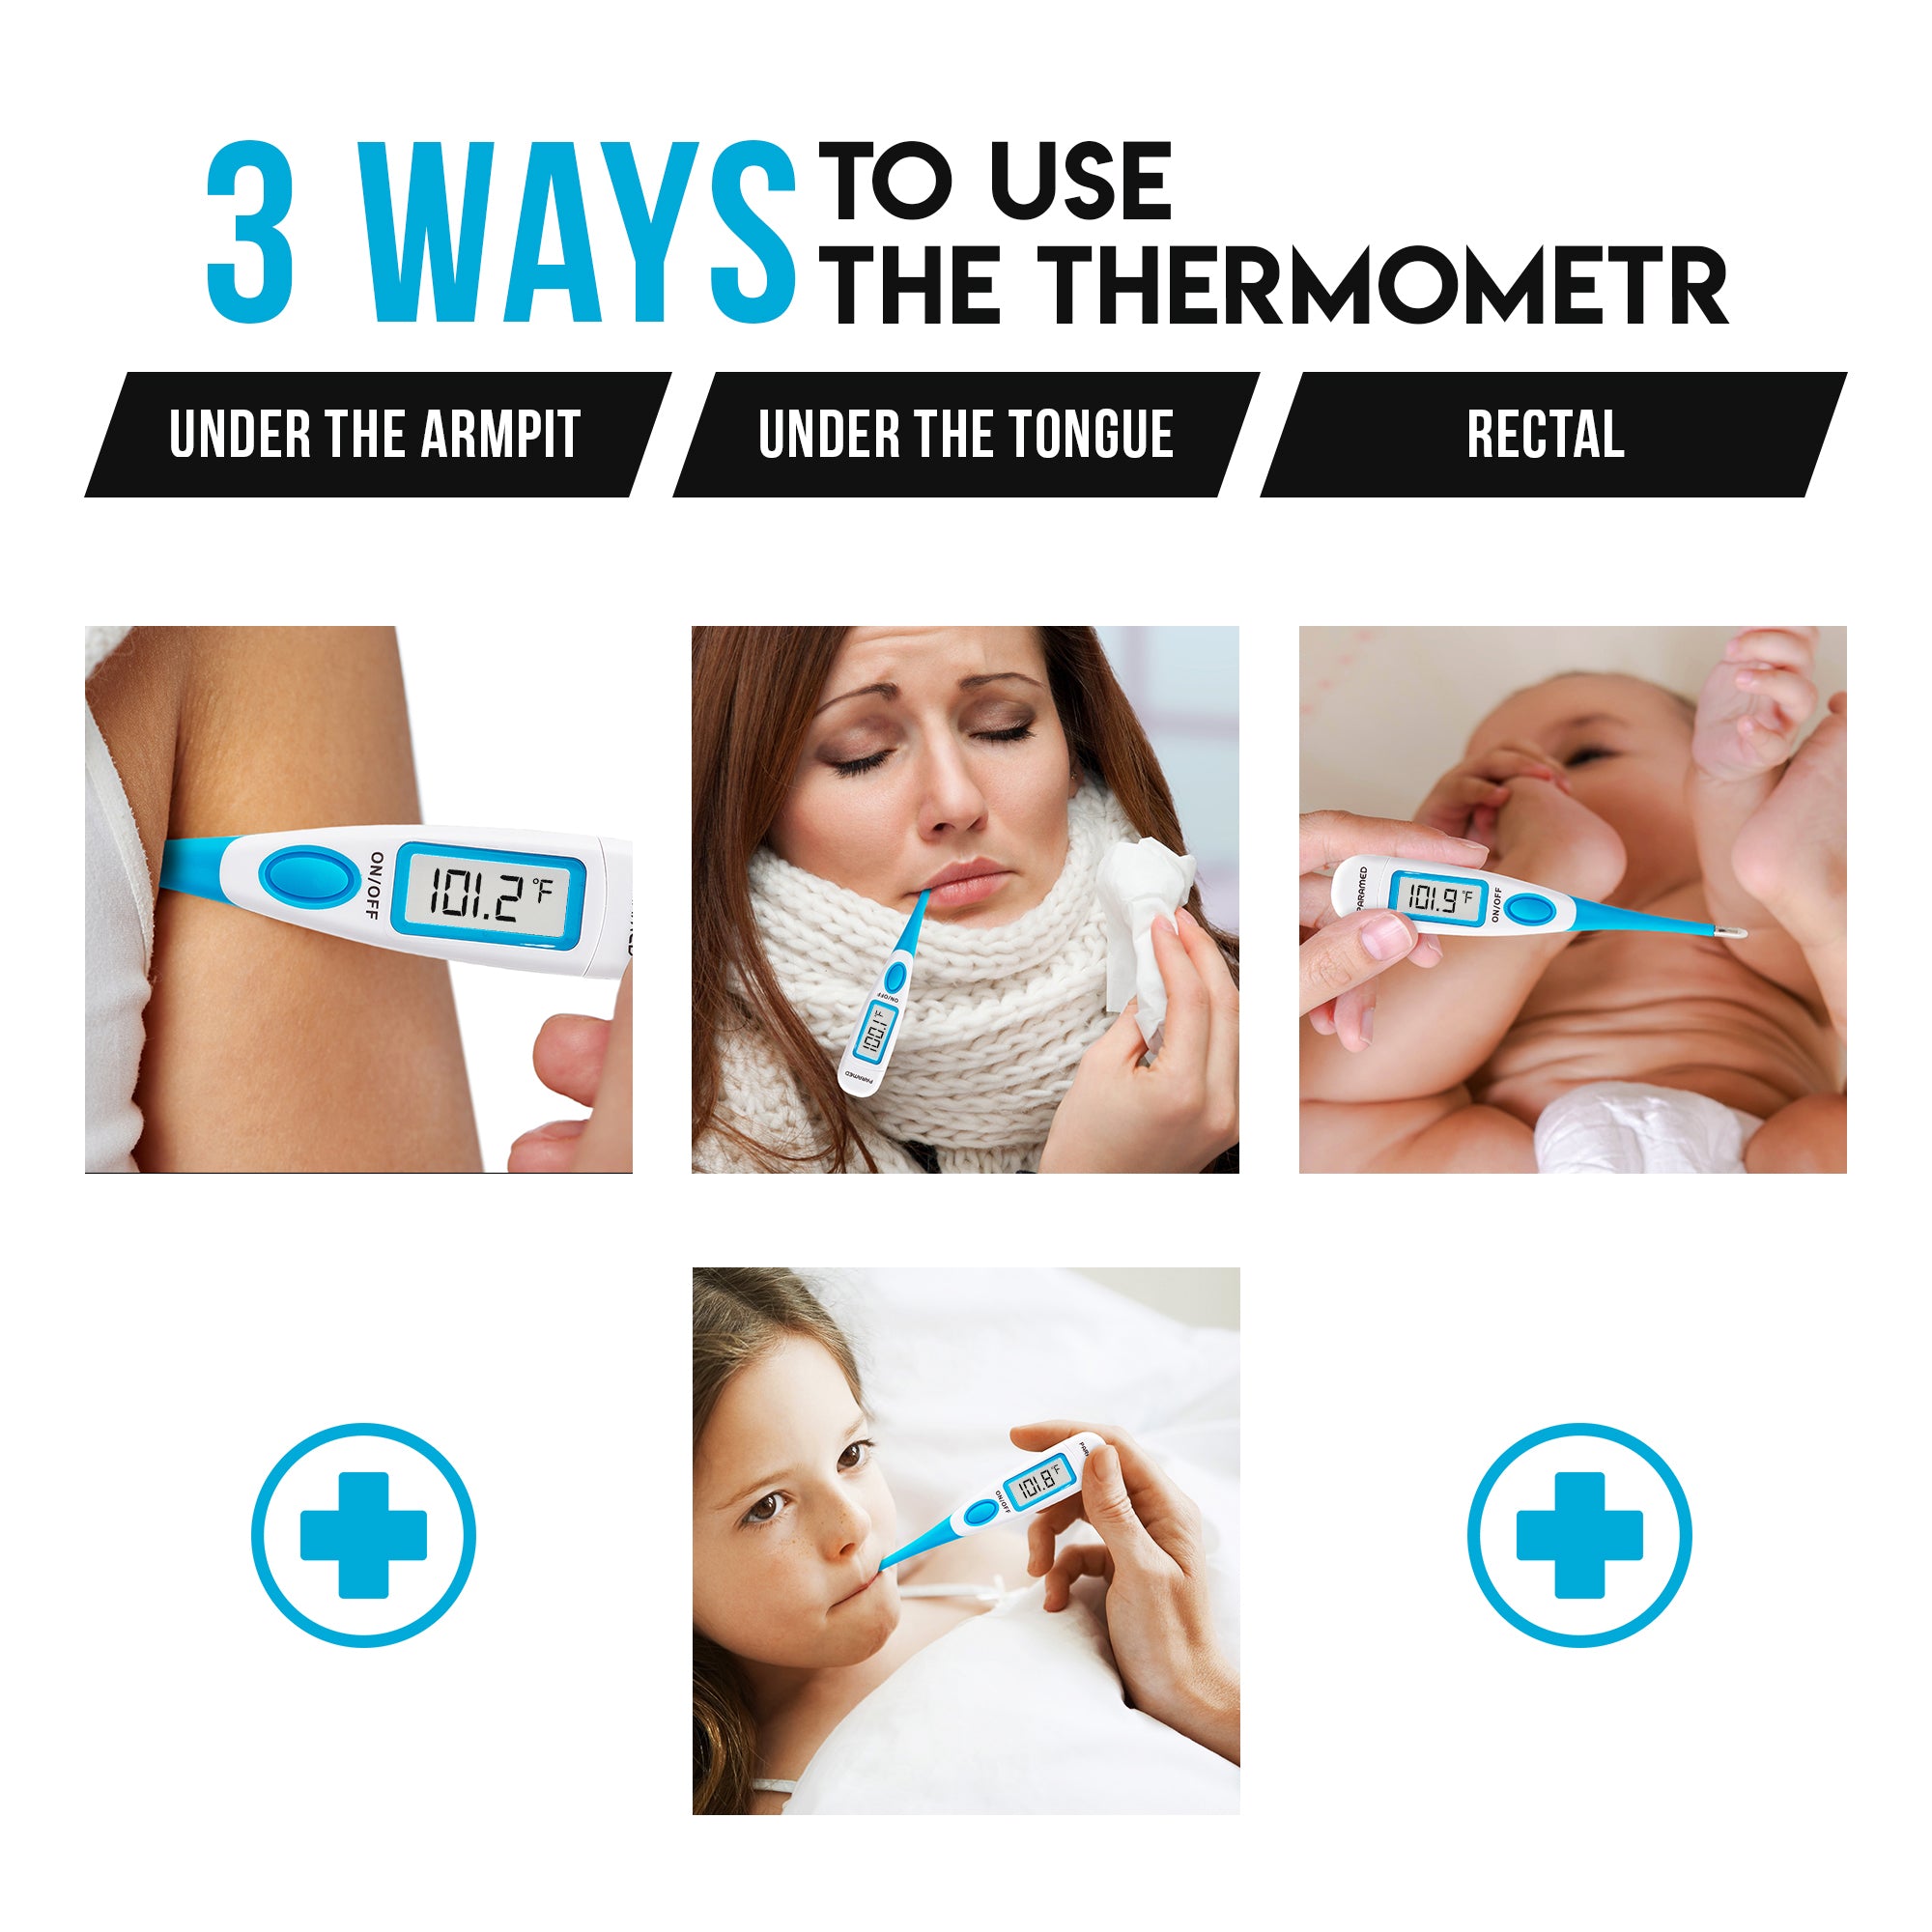 Tempa·DOT Disposable Oral Thermometer 1 Minute Oral 3 Minutes Axillary